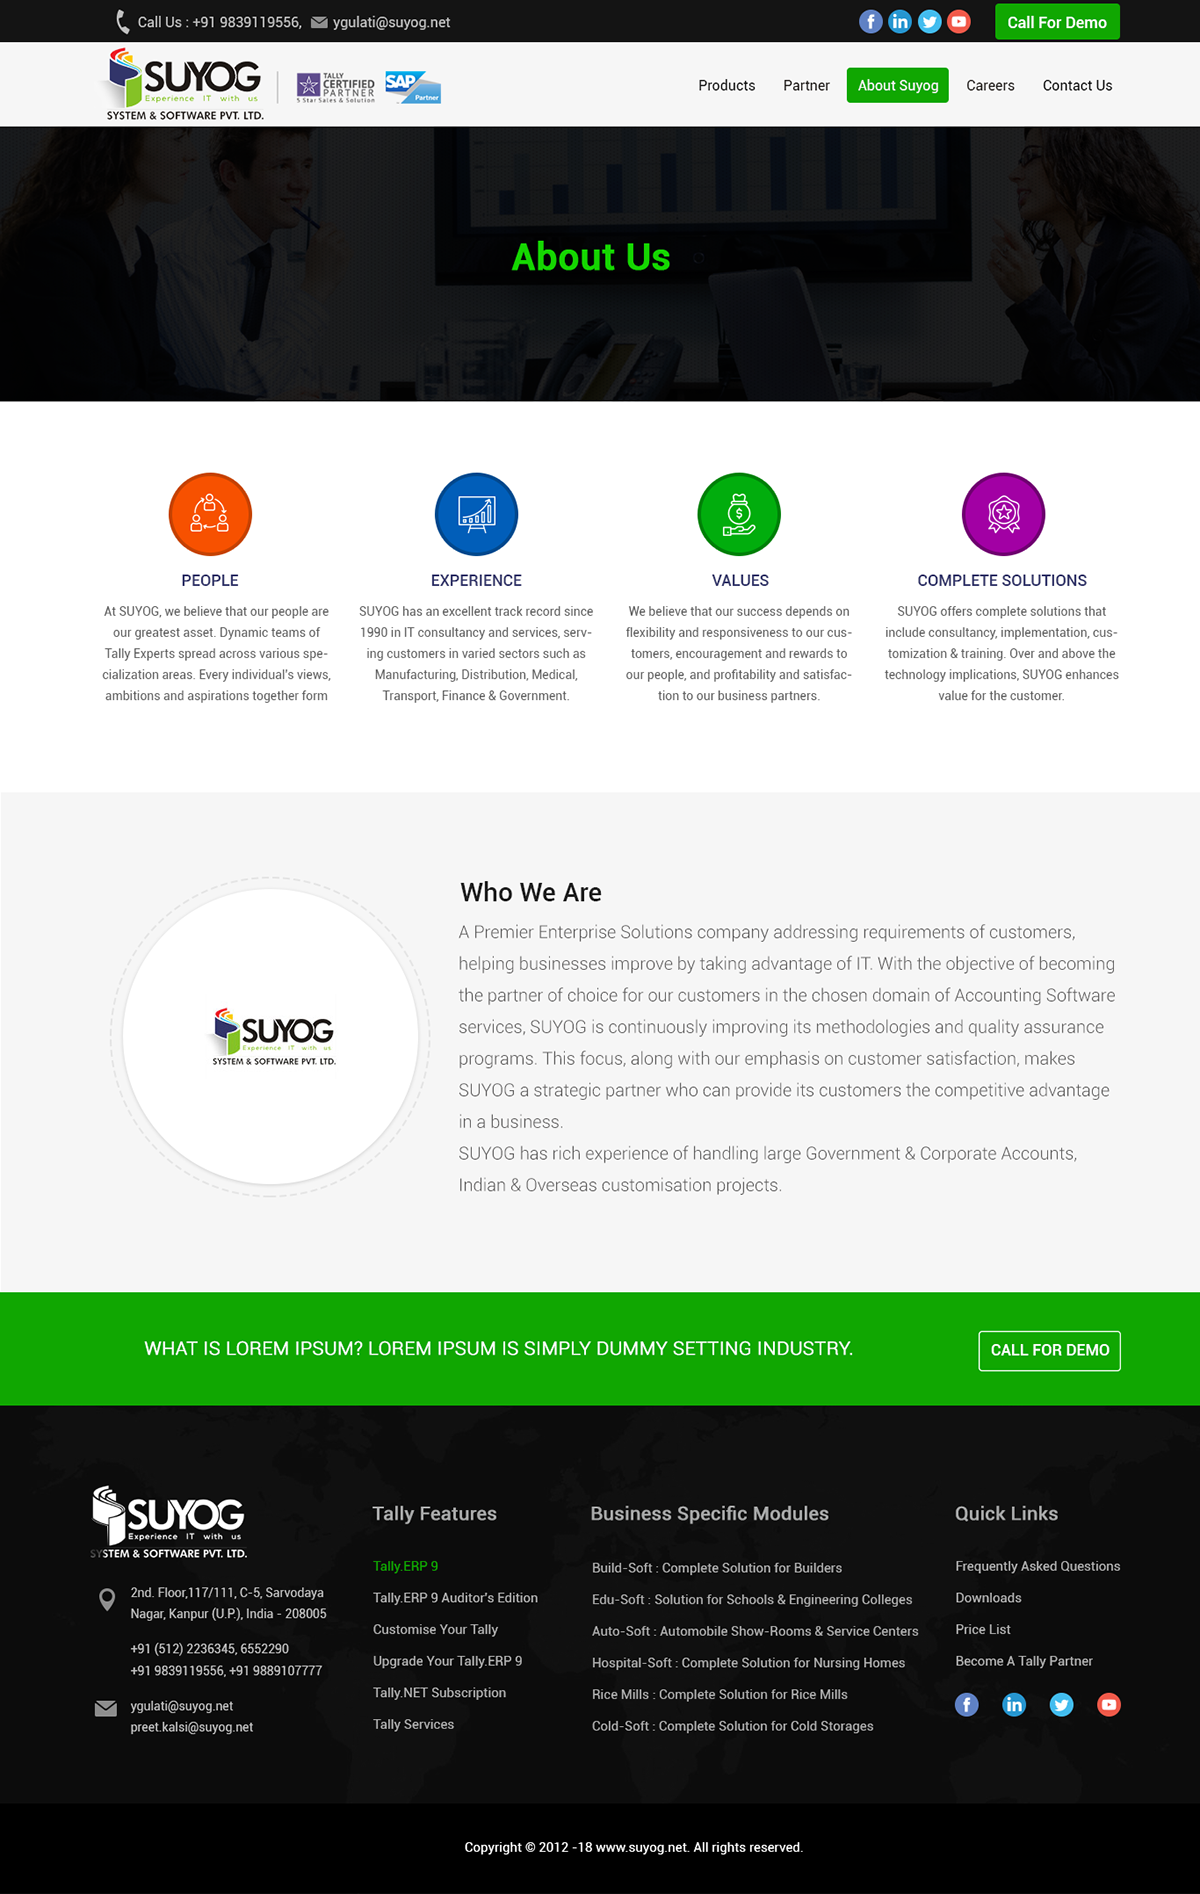 website themes Themes design Design for Software software development development company uidesign UX design Outline Systems India Tally Experts